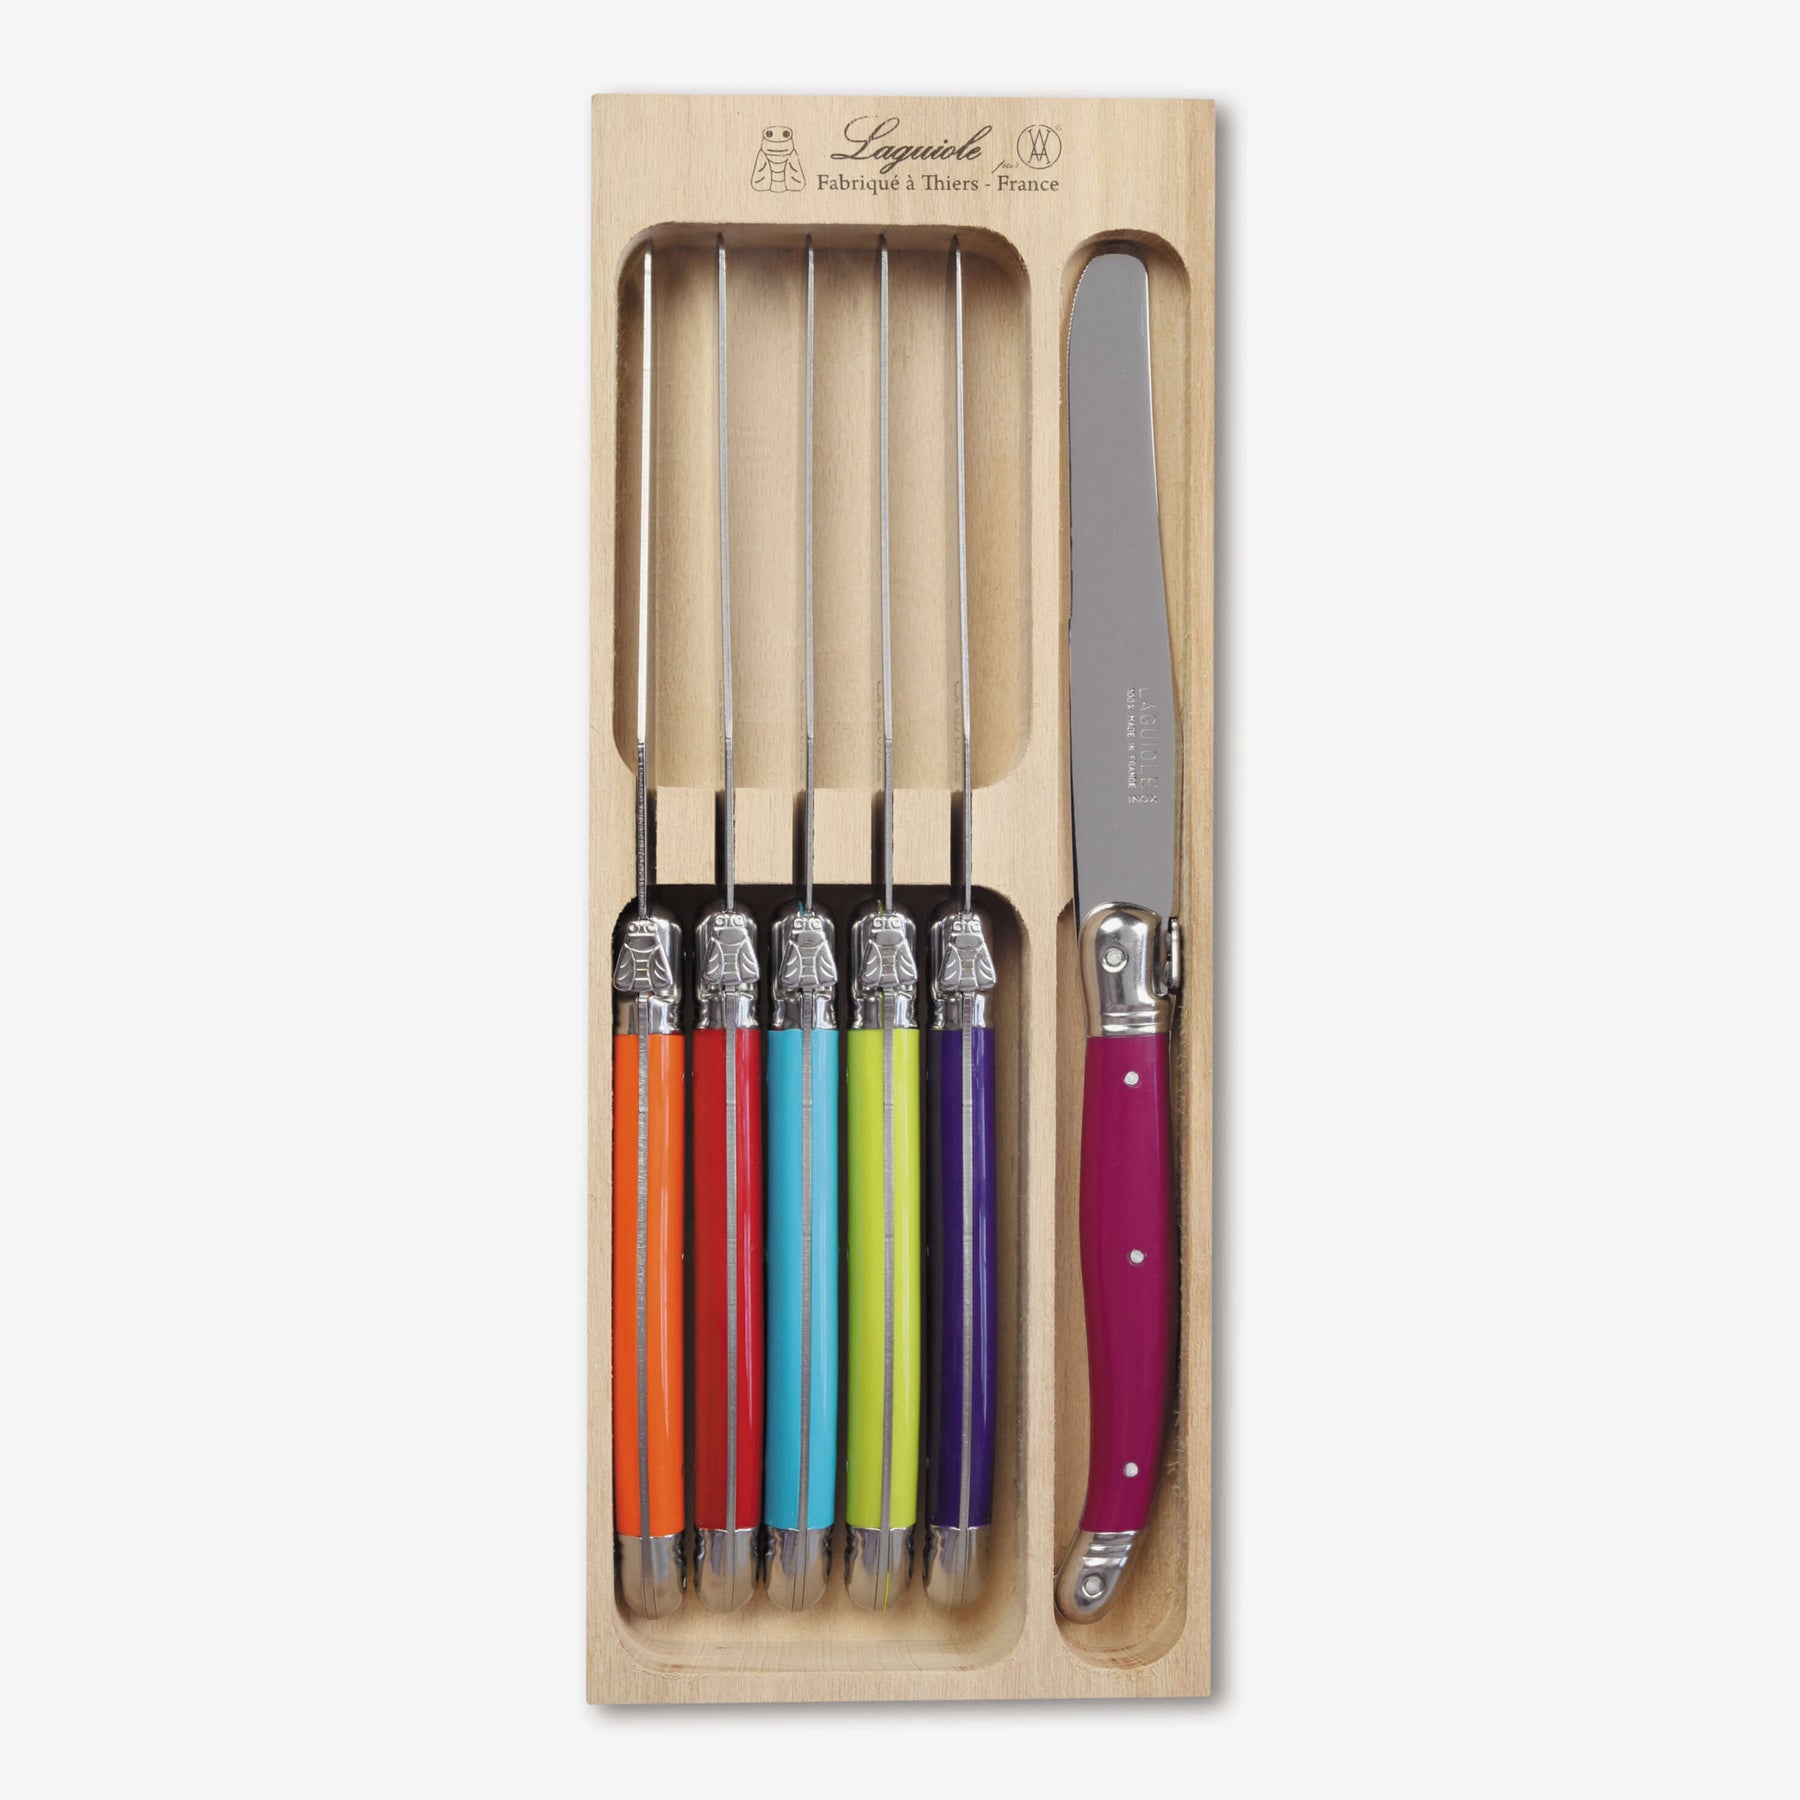 6 Piece Dinner Knife Set in Wooden Tray